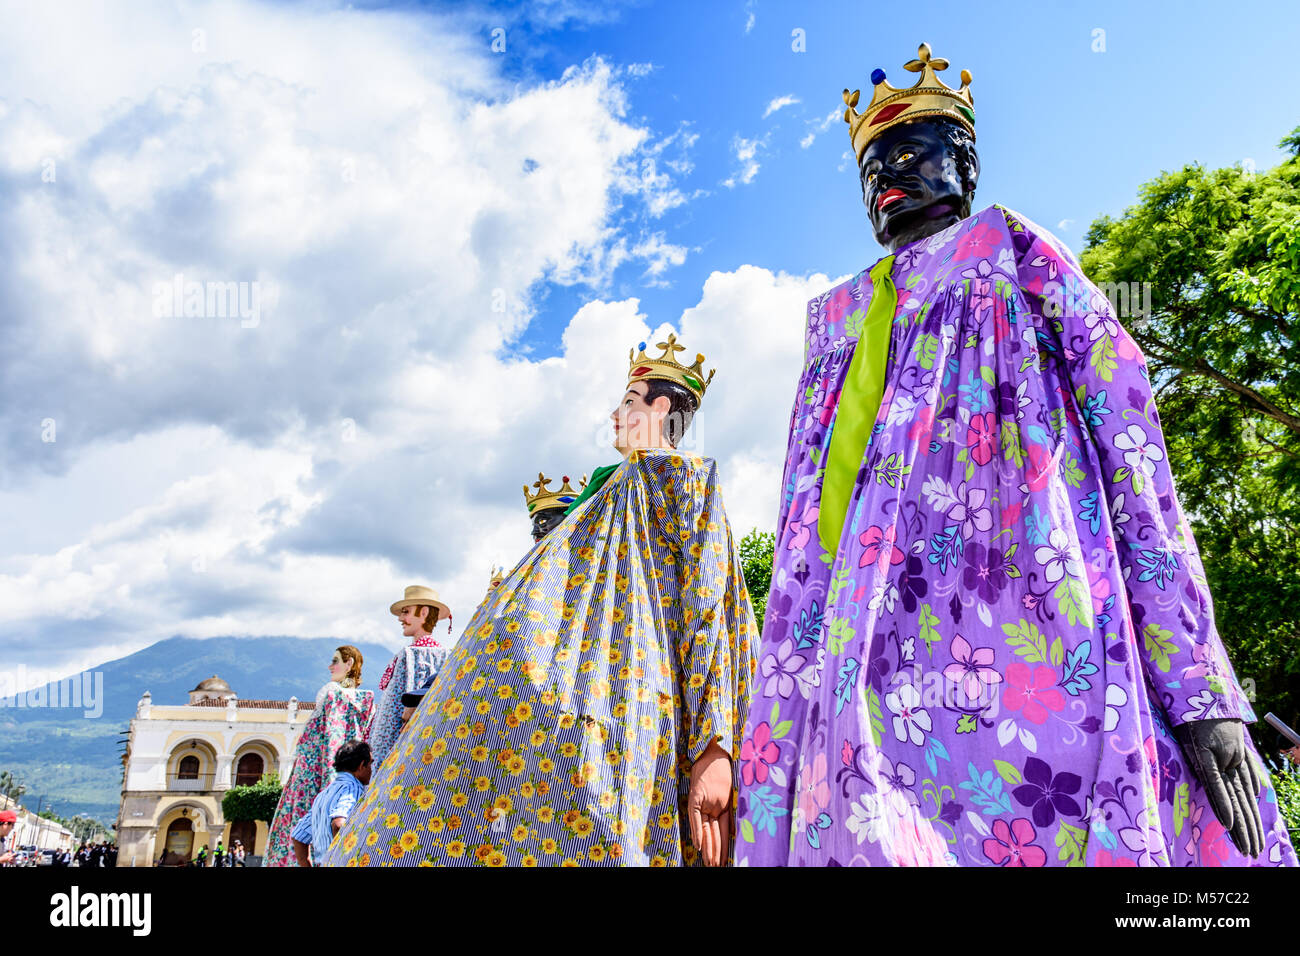 Antigua, Guatemala -  July 25, 2017: Traditional giant folk dancing puppets called gigantes on St Jame's Day, Antigua's patron saint day Stock Photo